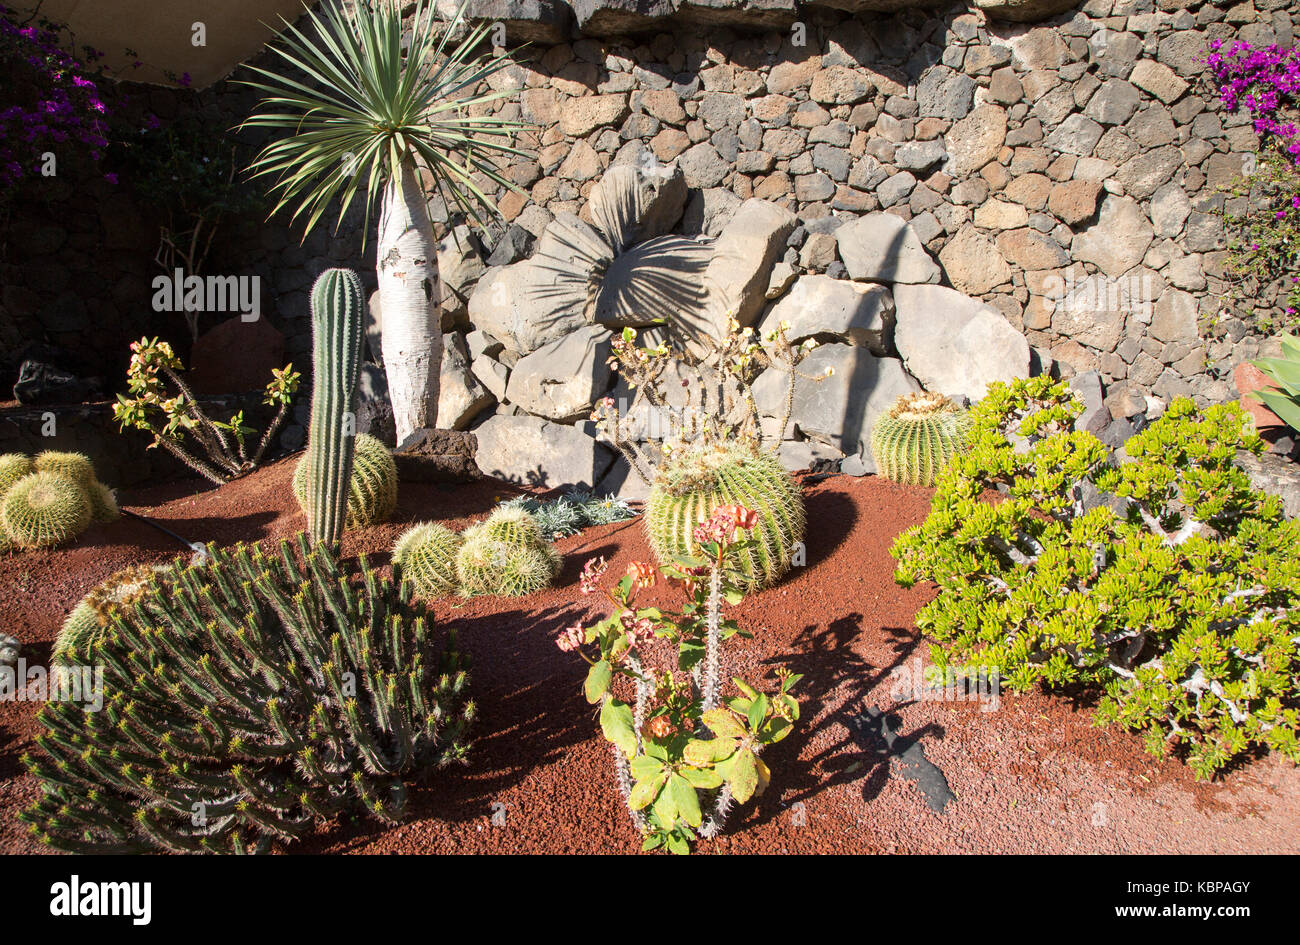 Small cacti garden with different varieties of cactus, Lanzarote, Canary Islands, Spain Stock Photo